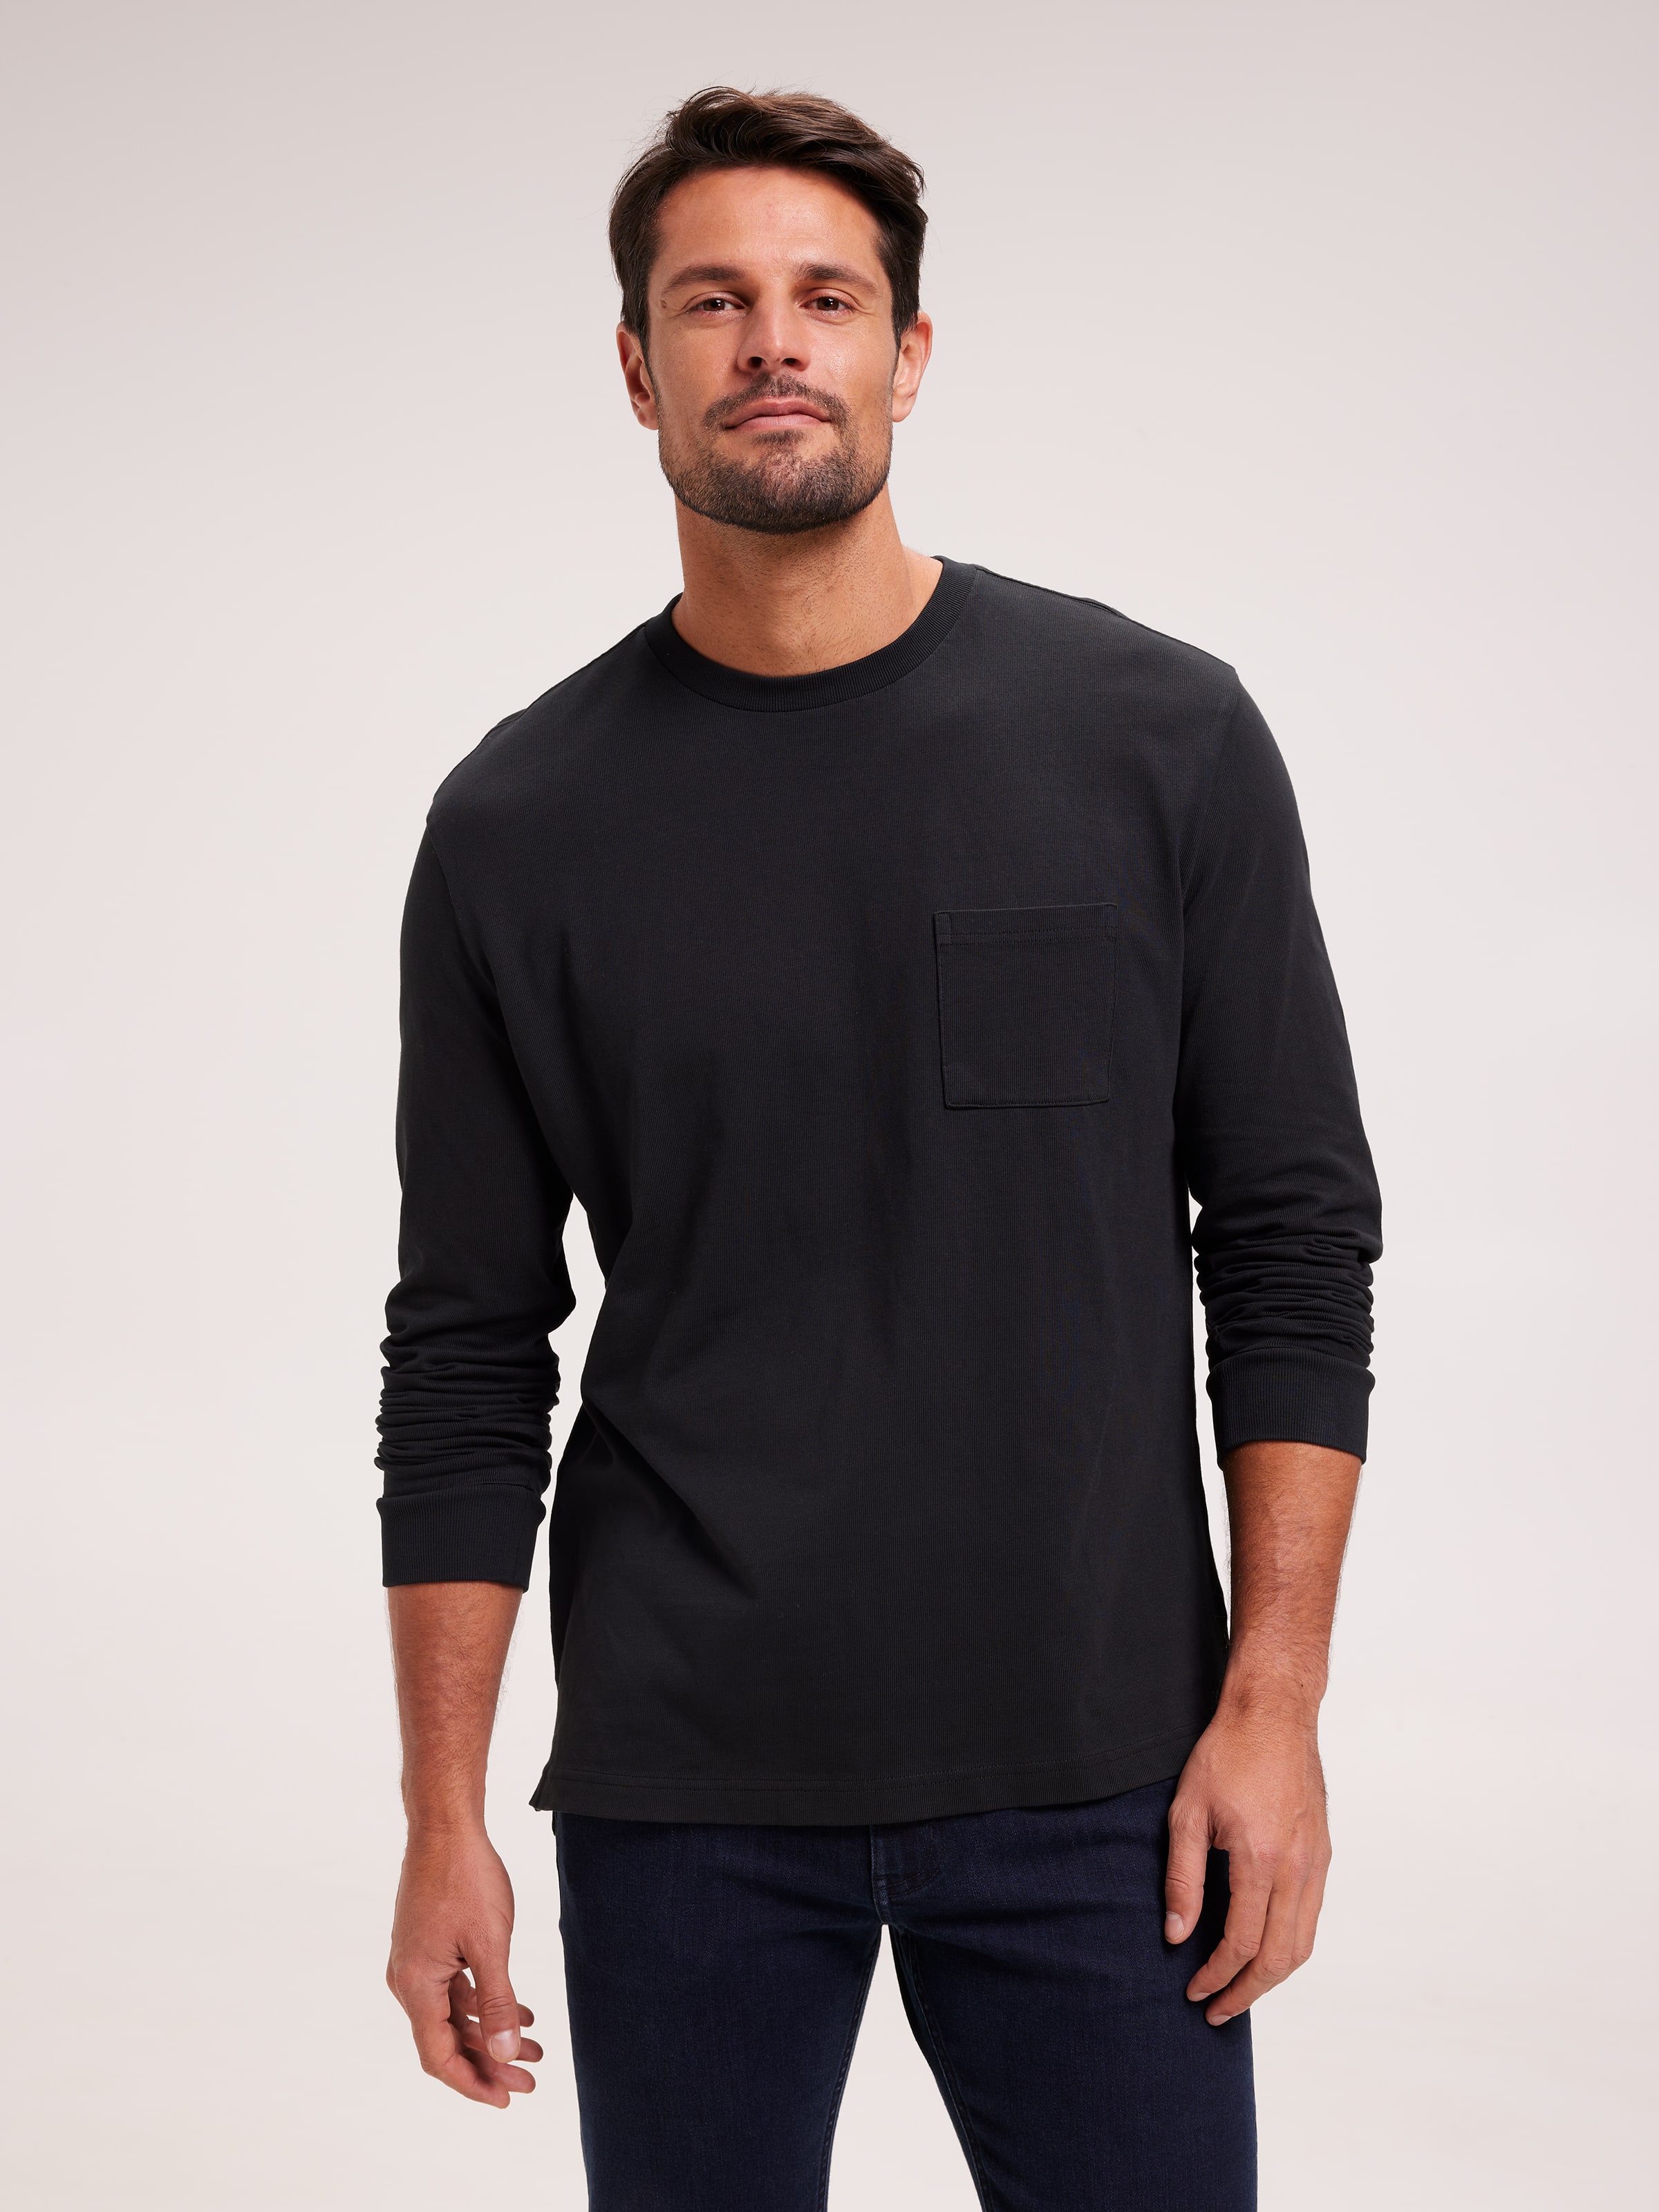 Men's Tops - Shirts, Tees, Sweaters & More